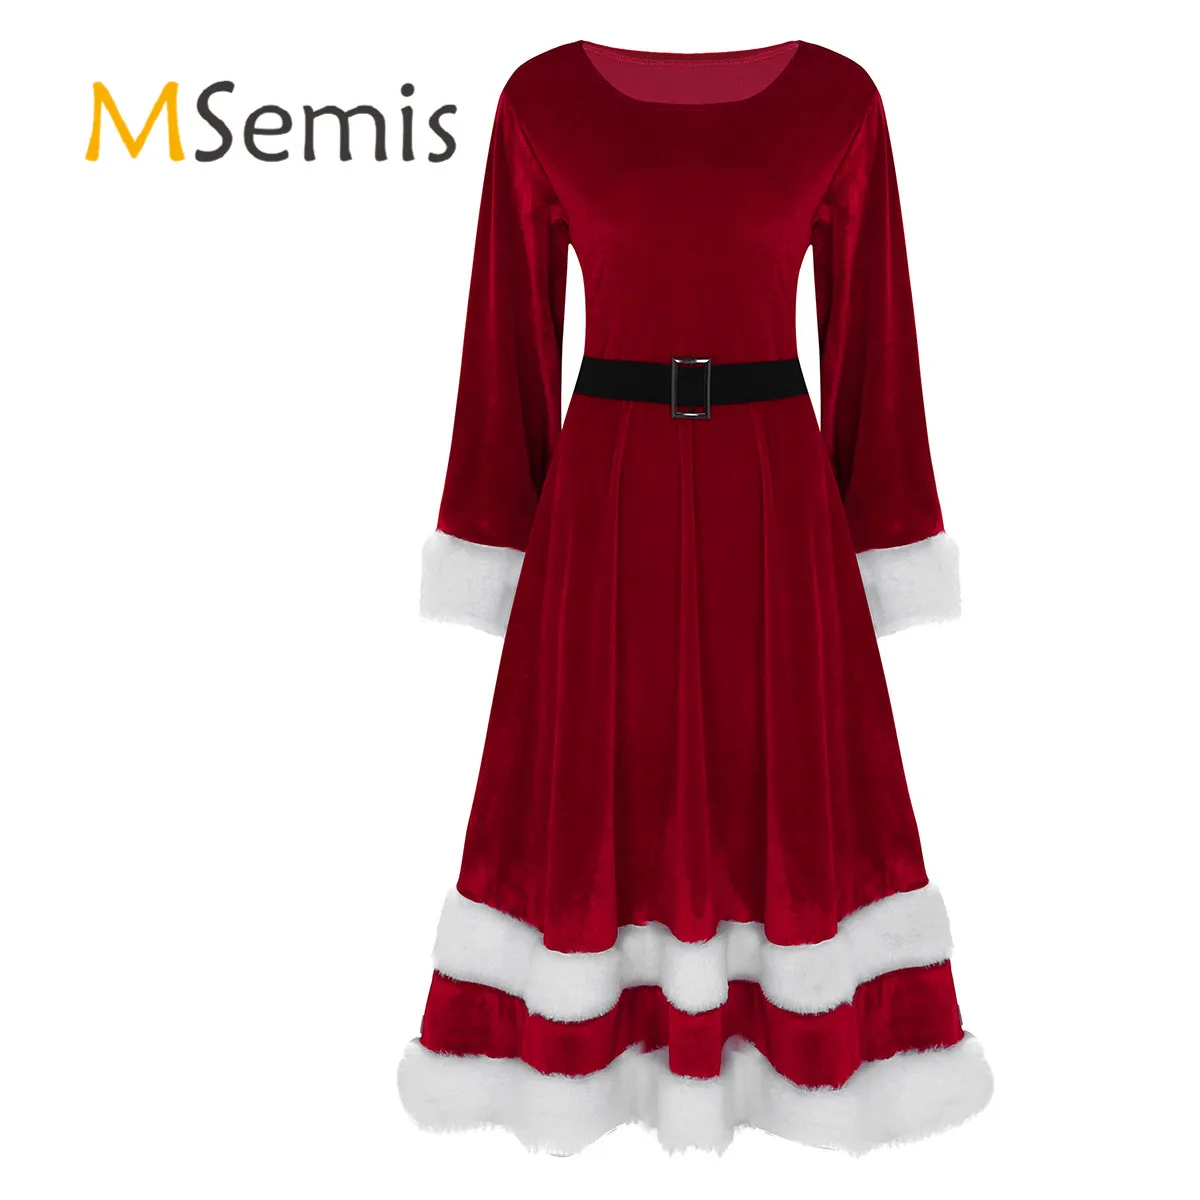 Womens Ladies Mrs Santa Claus Costume Adults Christmas Fancy Cosplay Dress Outfit Soft Velvet Scoop Neck Long Sleeves Dresses